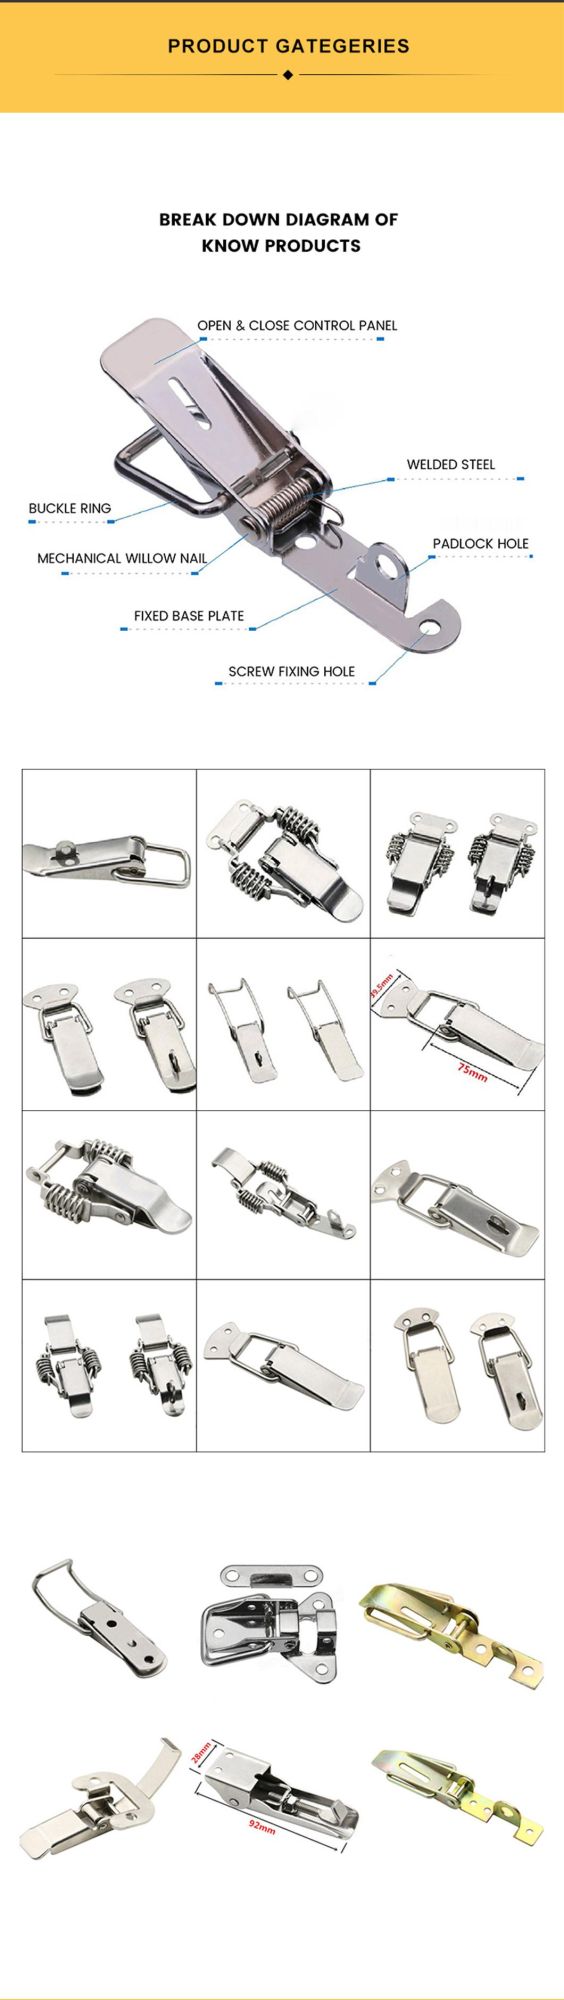 Adjustable Draw Latch Plastic Toggle Latch Steel Hasp Fastener Metal Draw Catch Mild Steel or Stainless Steel Rotary Draw Latch